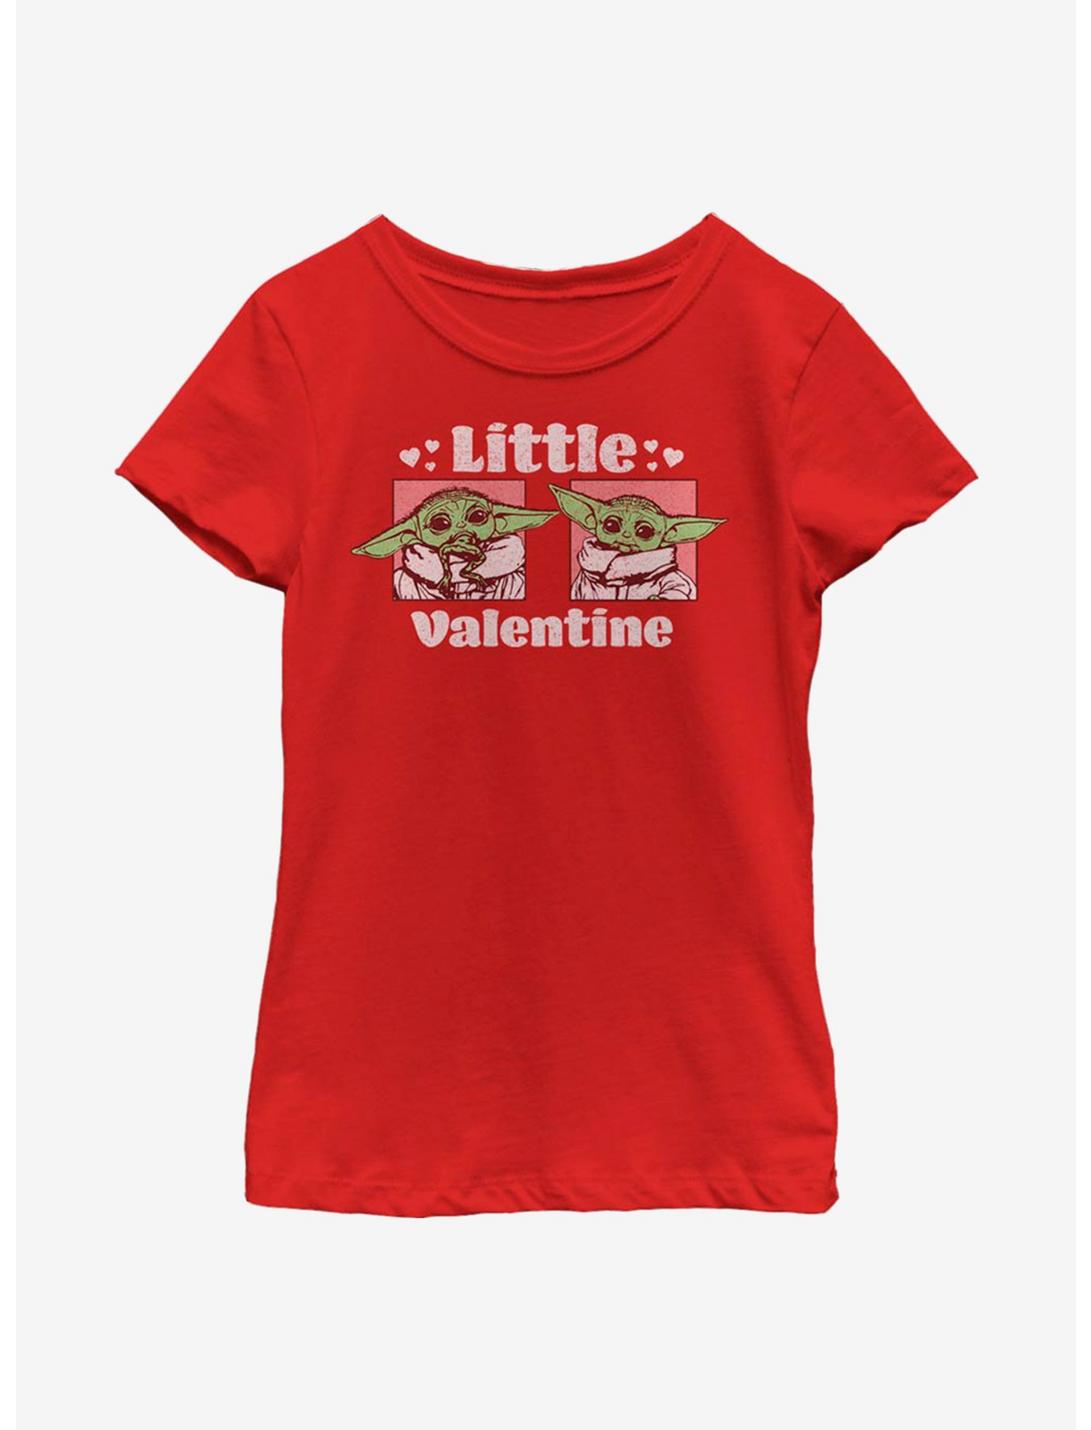 Star Wars The Mandalorian The Child Little Valentine Youth Girls T-Shirt, RED, hi-res